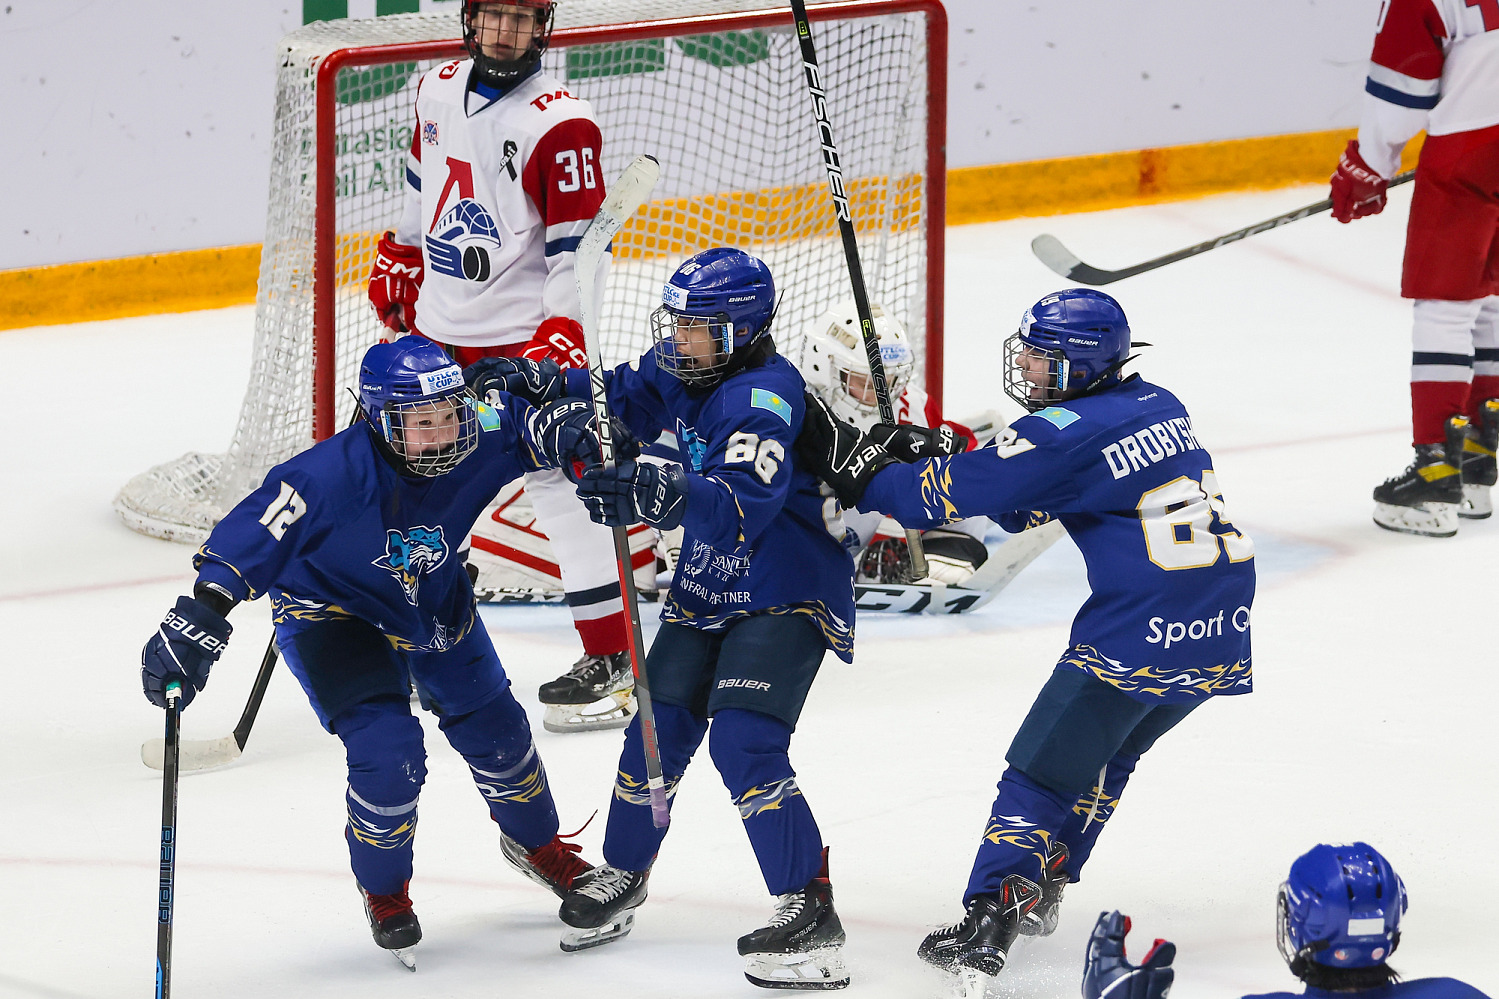 Barys reached the semifinals of UTLC Ice Cup